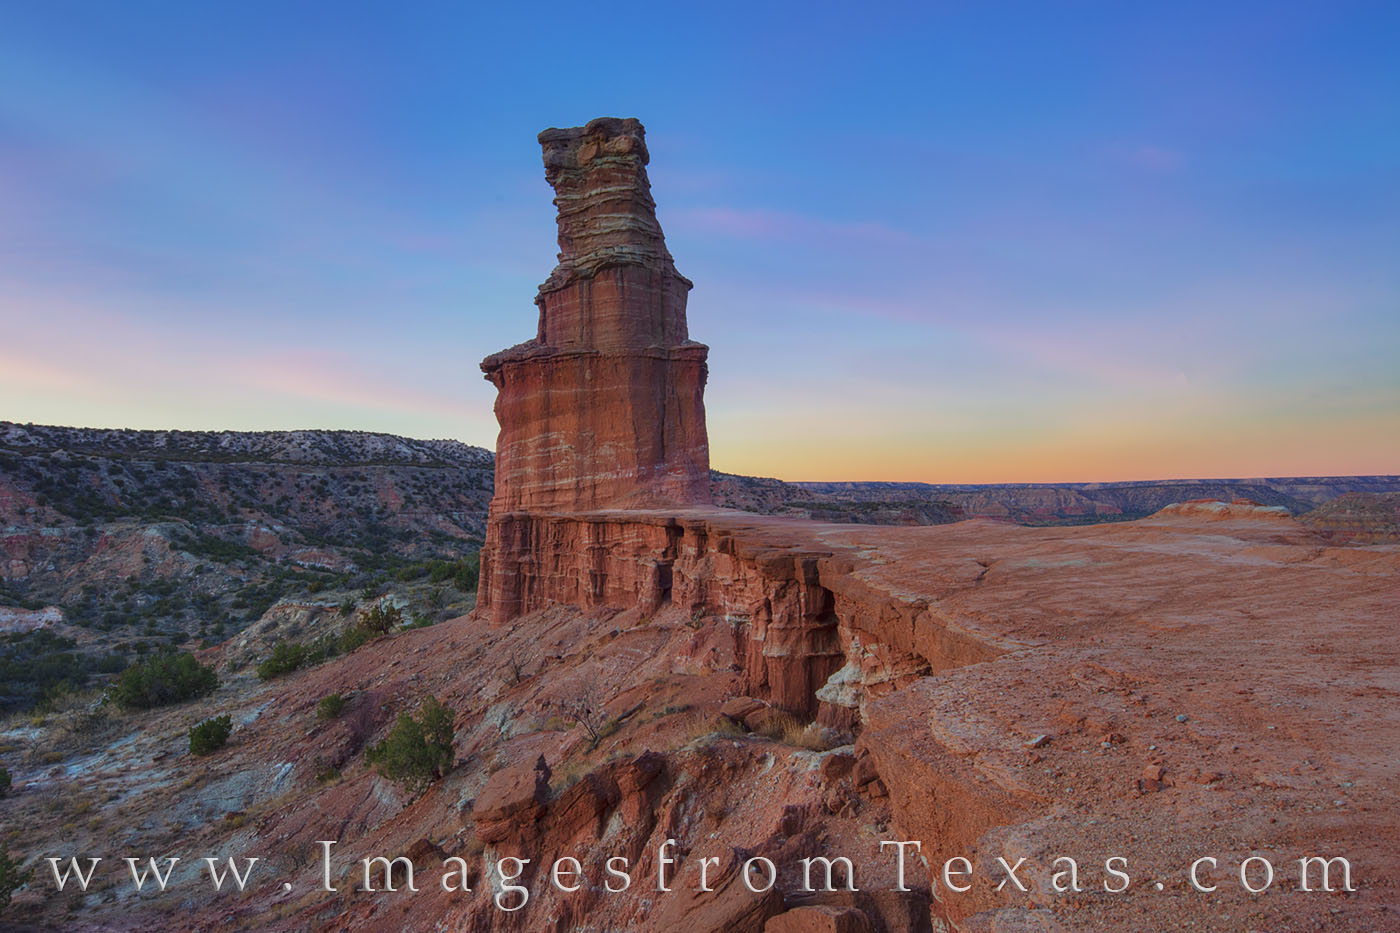 The Lighthouse in Palo Duro Canyon State Park rises into the cool November evening.